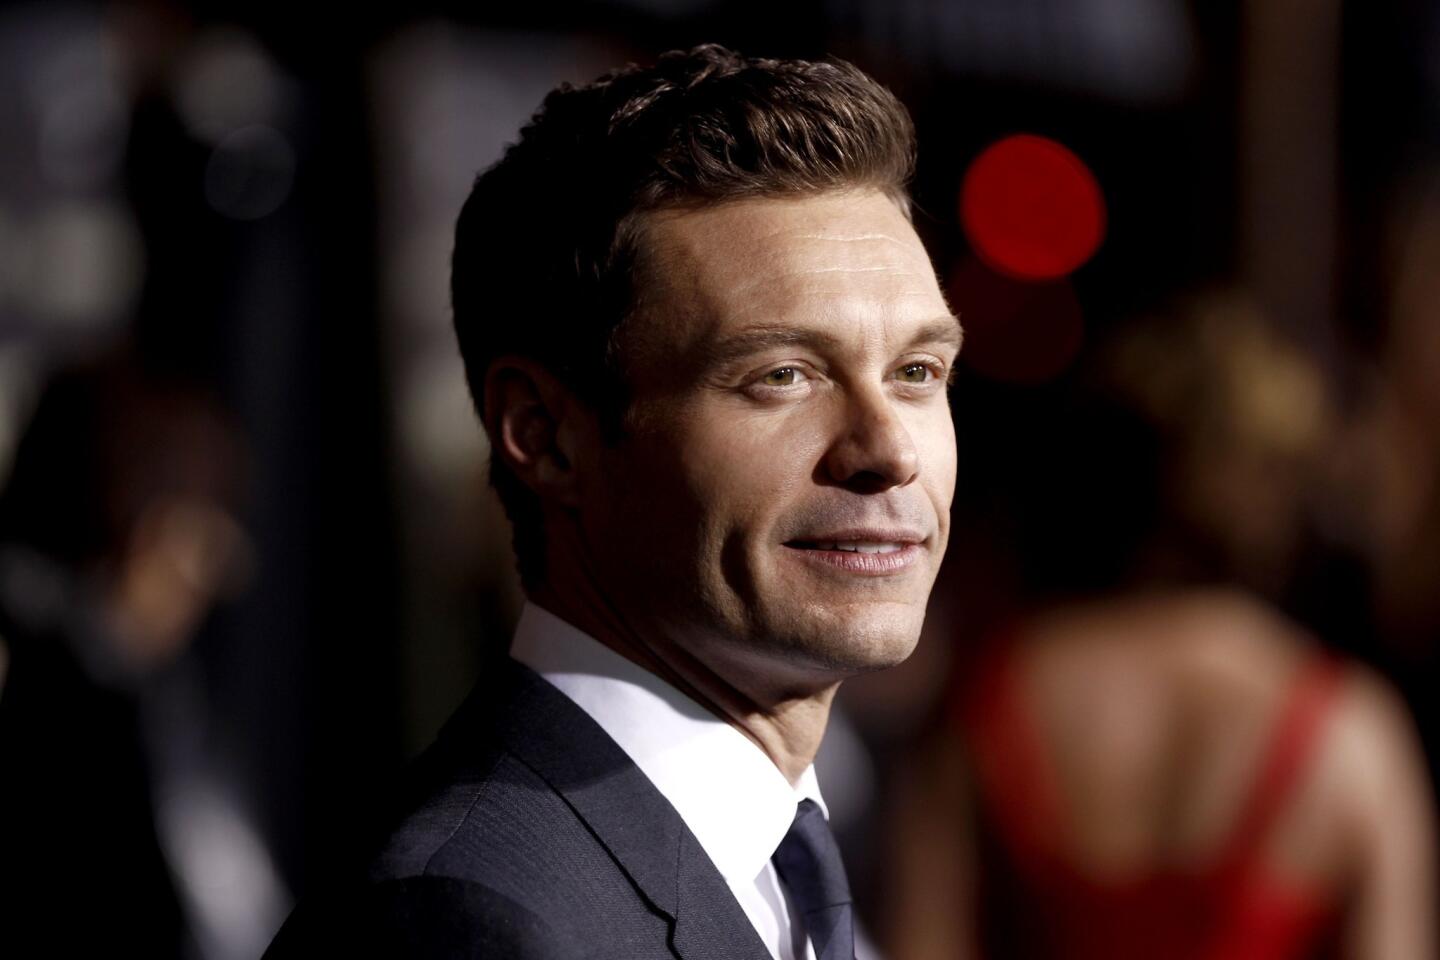 This blond and bronzed television-hosting, executive-producing, donation-giving and Emmy Award-winning guy is Ryan Seacrest. Take a peek at his many involvements across media platforms.